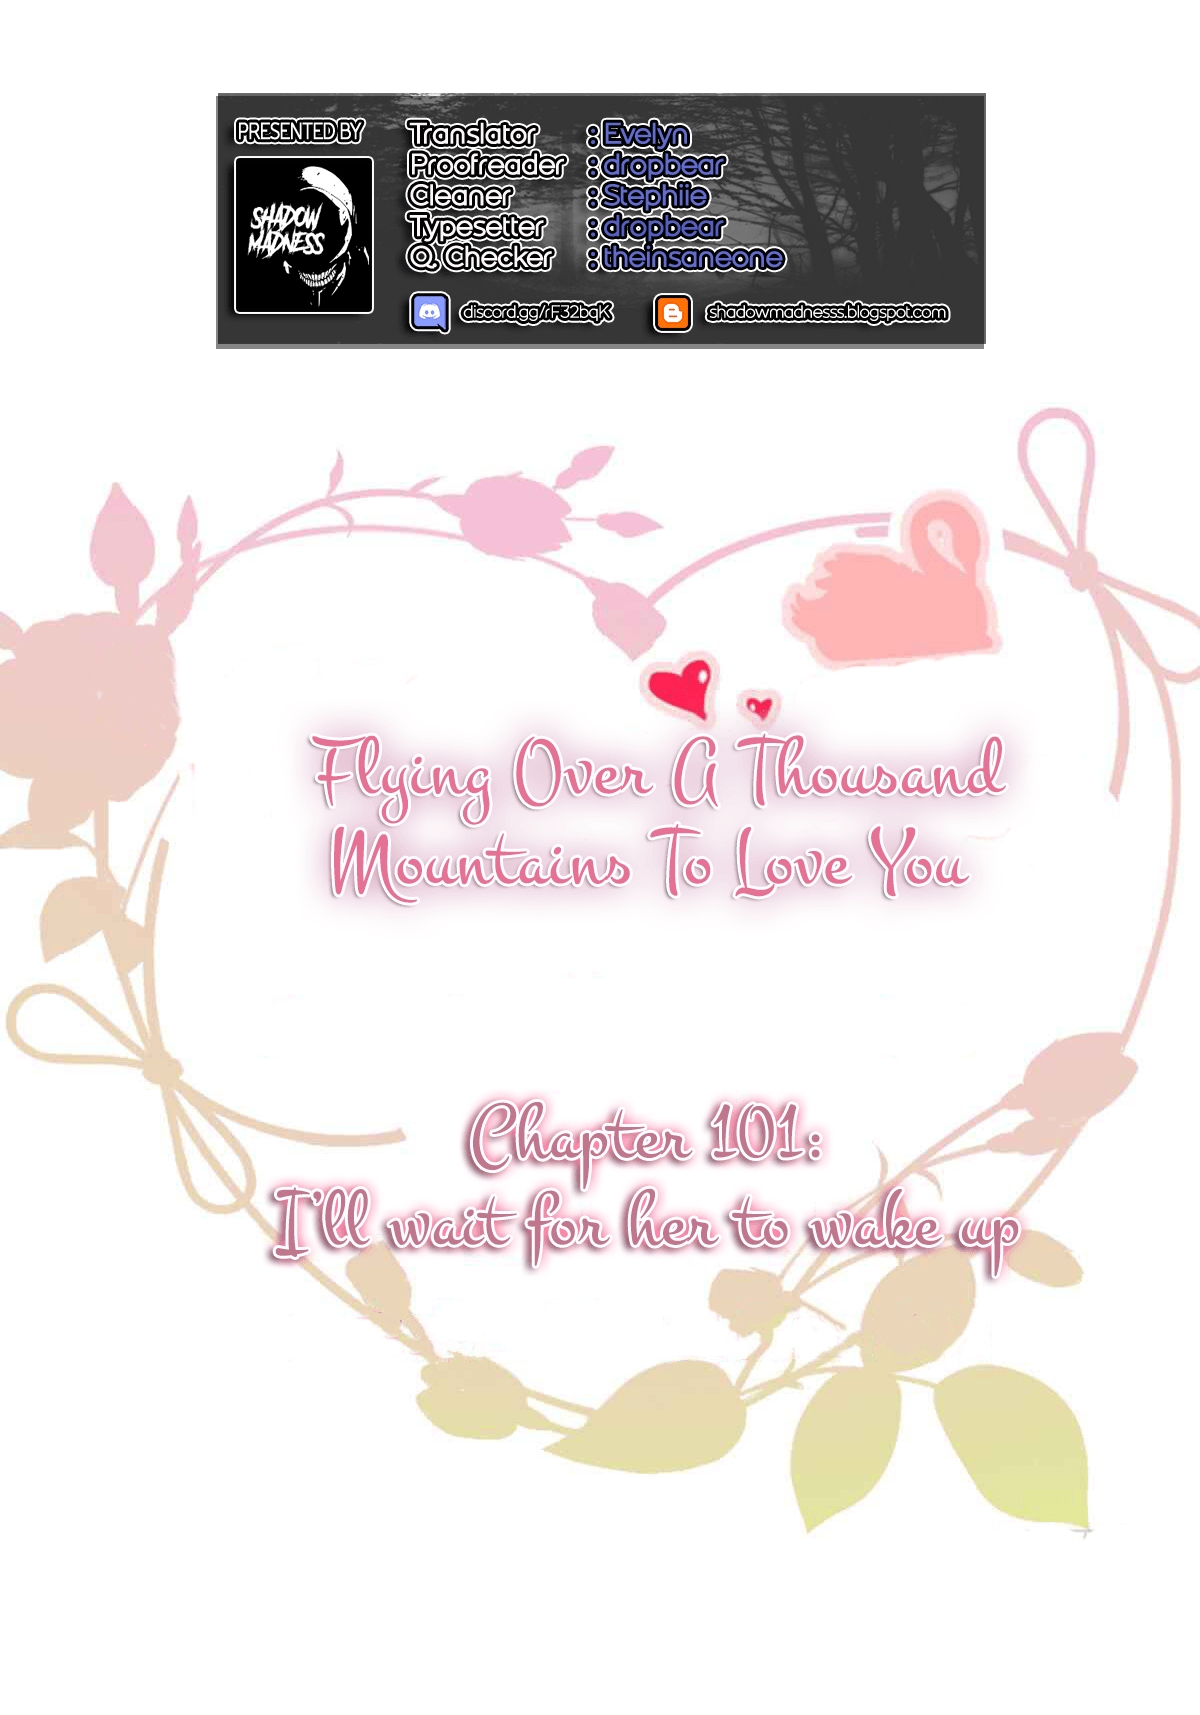 Flying Over a Thousand Mountains to Love You Ch. 101 I’ll wait for her to wake up